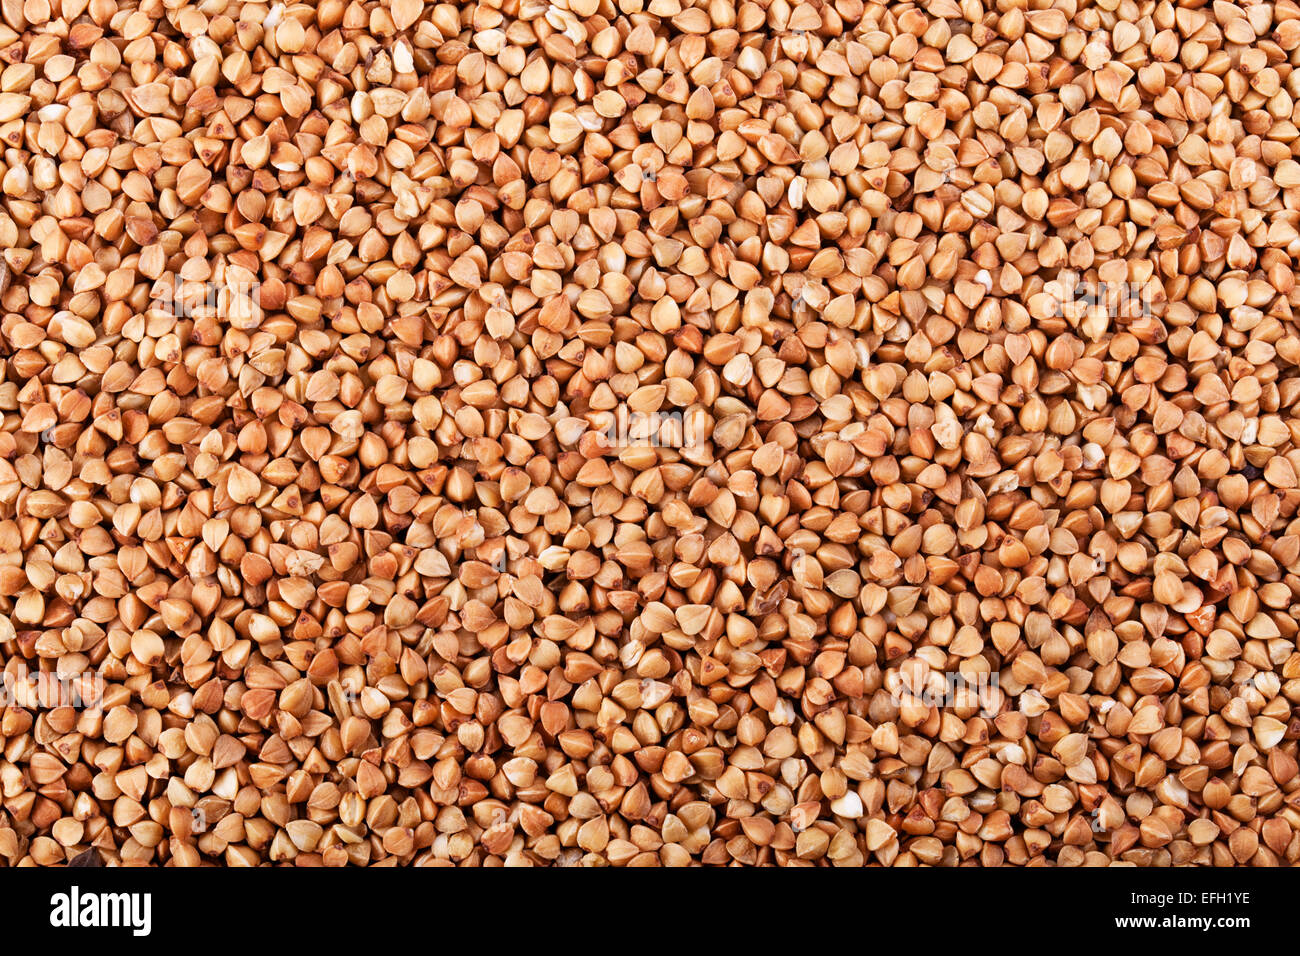 Background of fresh buckwheat for your design Stock Photo